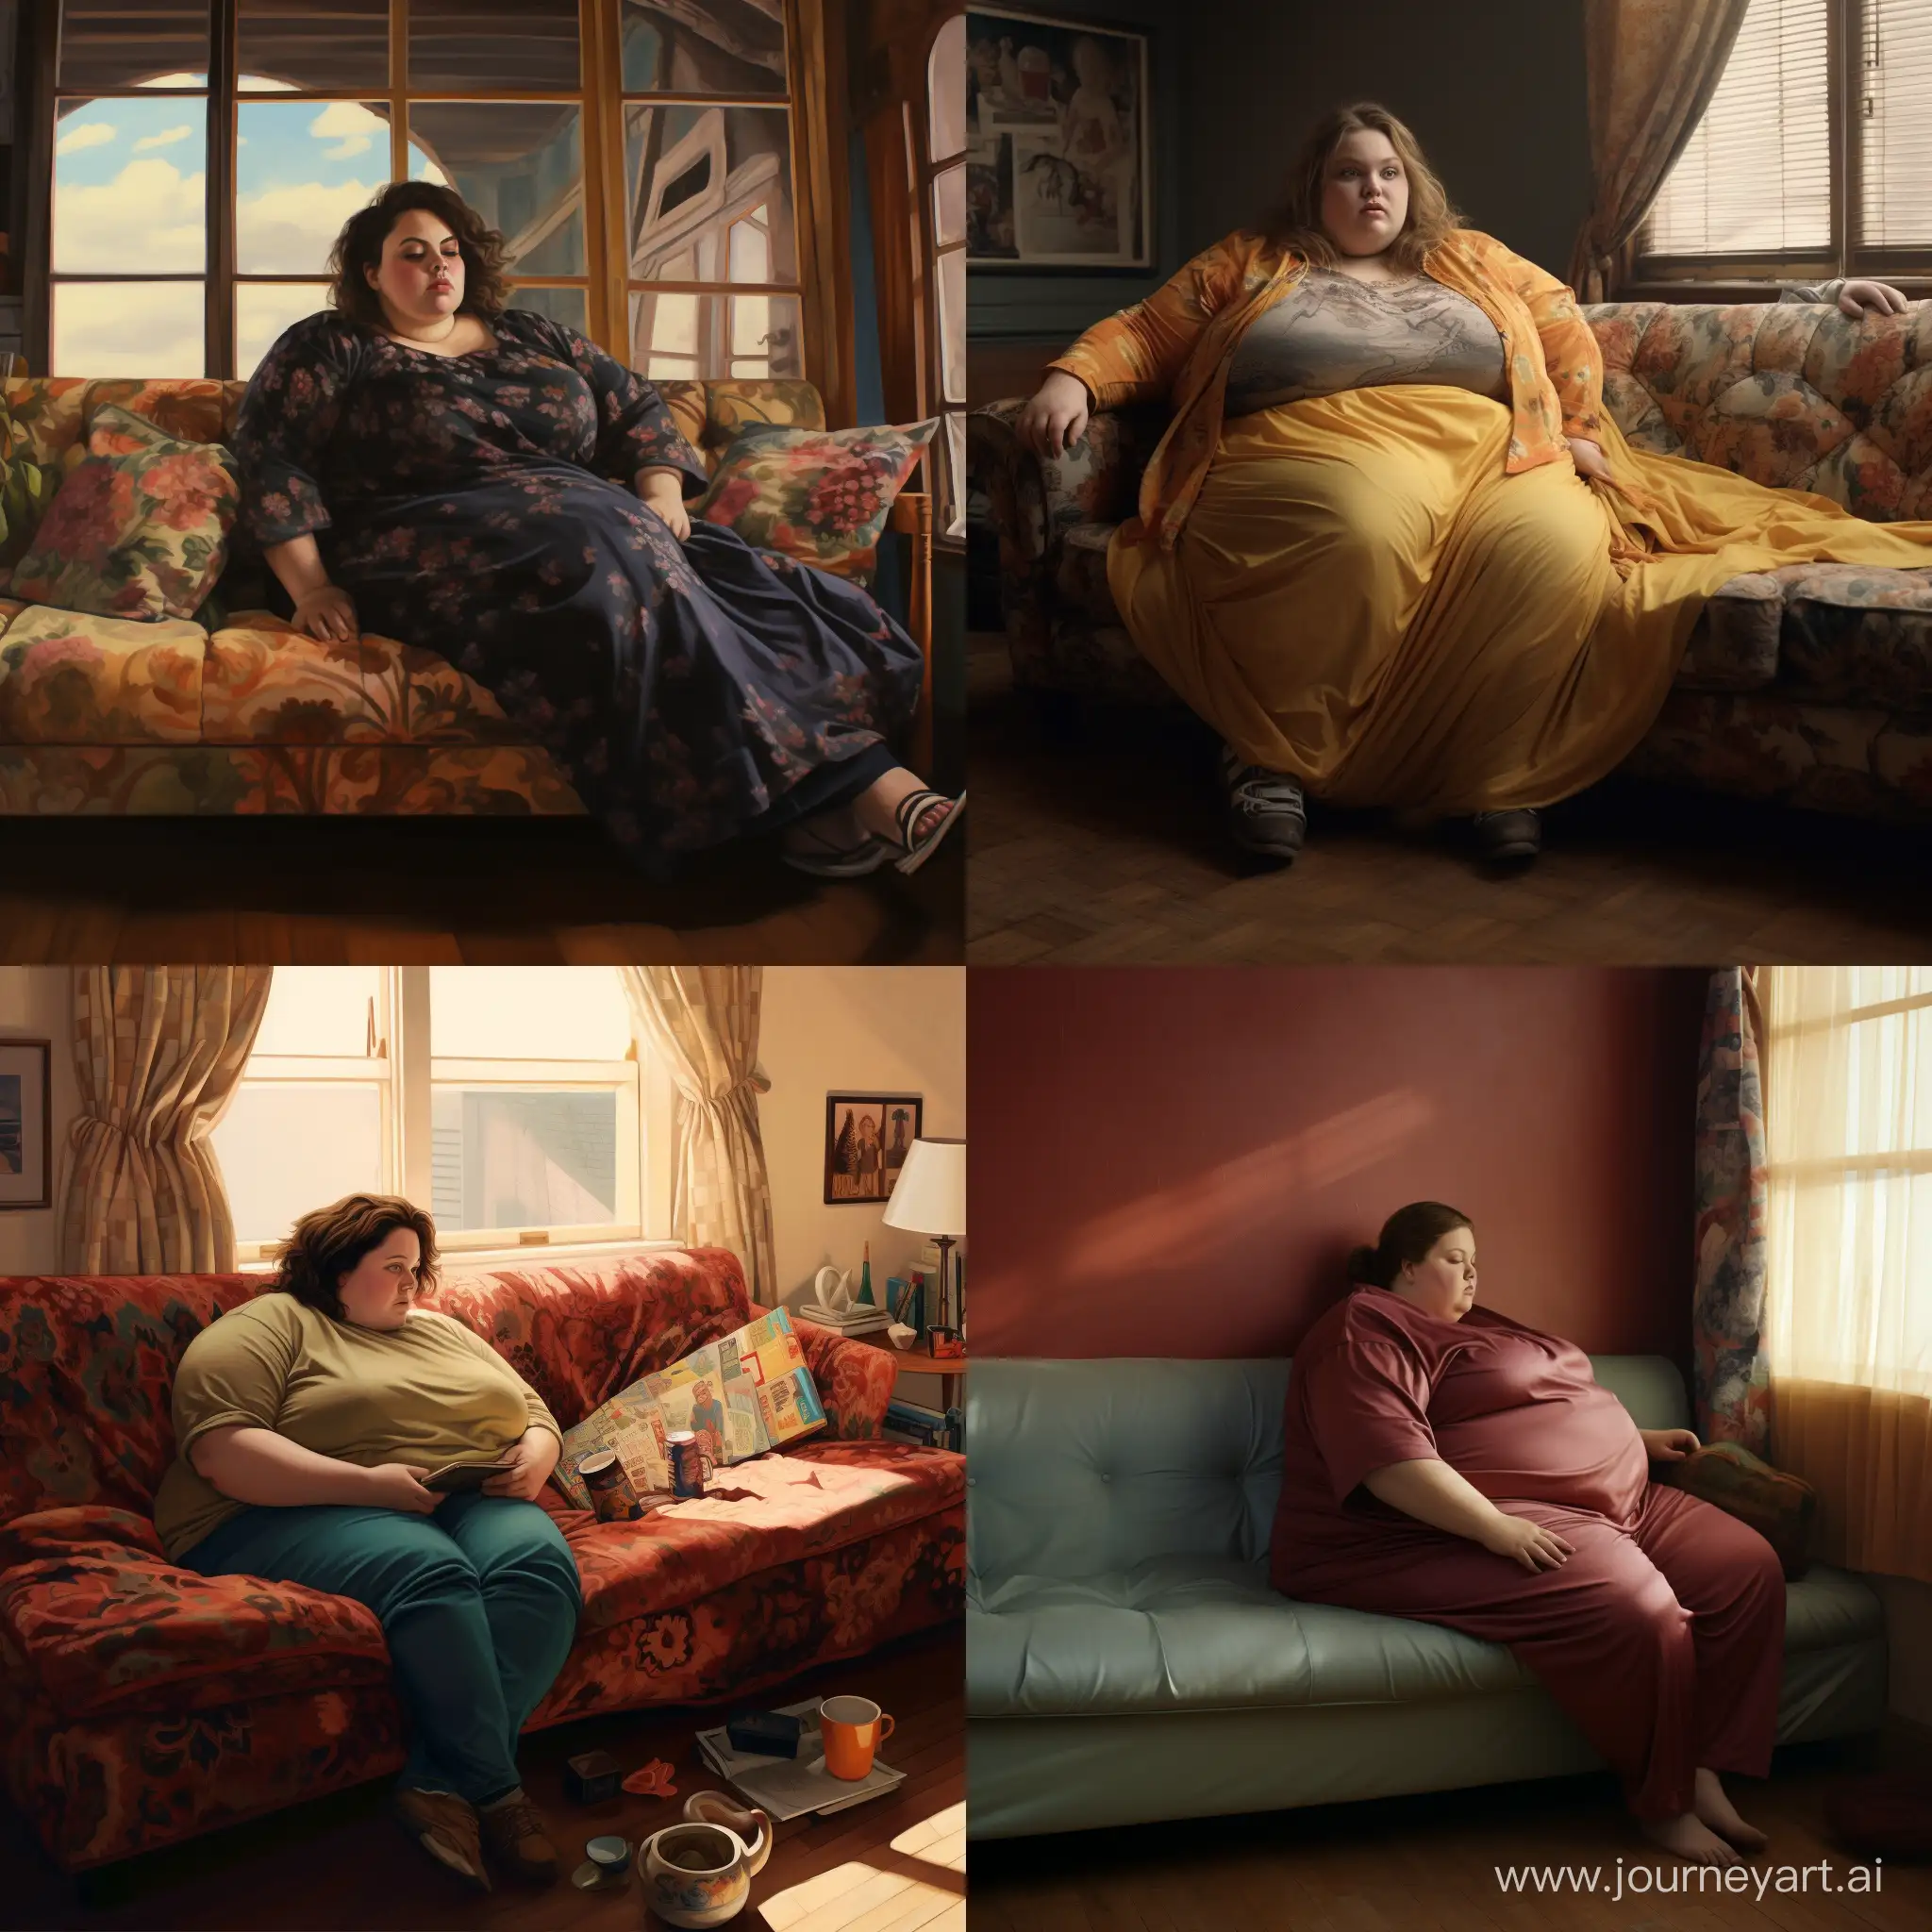 Comfortable-Indoor-Seating-Relaxed-Overweight-Woman-on-Sofa